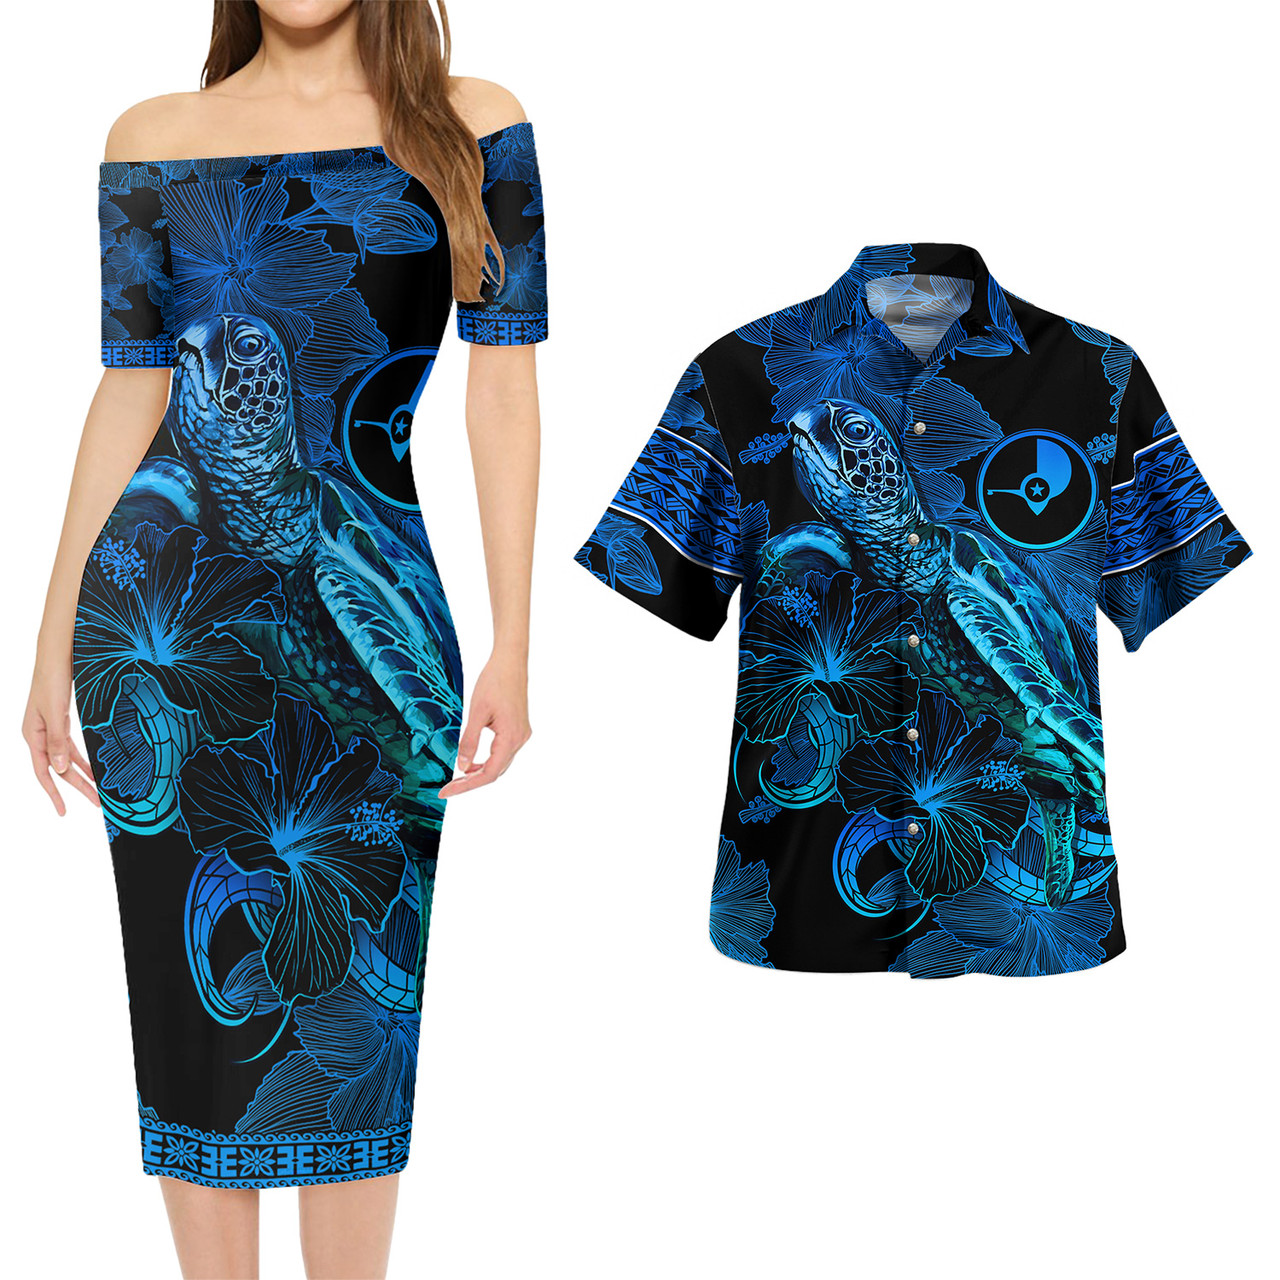 Yap State Combo Short Sleeve Dress And Shirt Sea Turtle With Blooming Hibiscus Flowers Tribal Blue